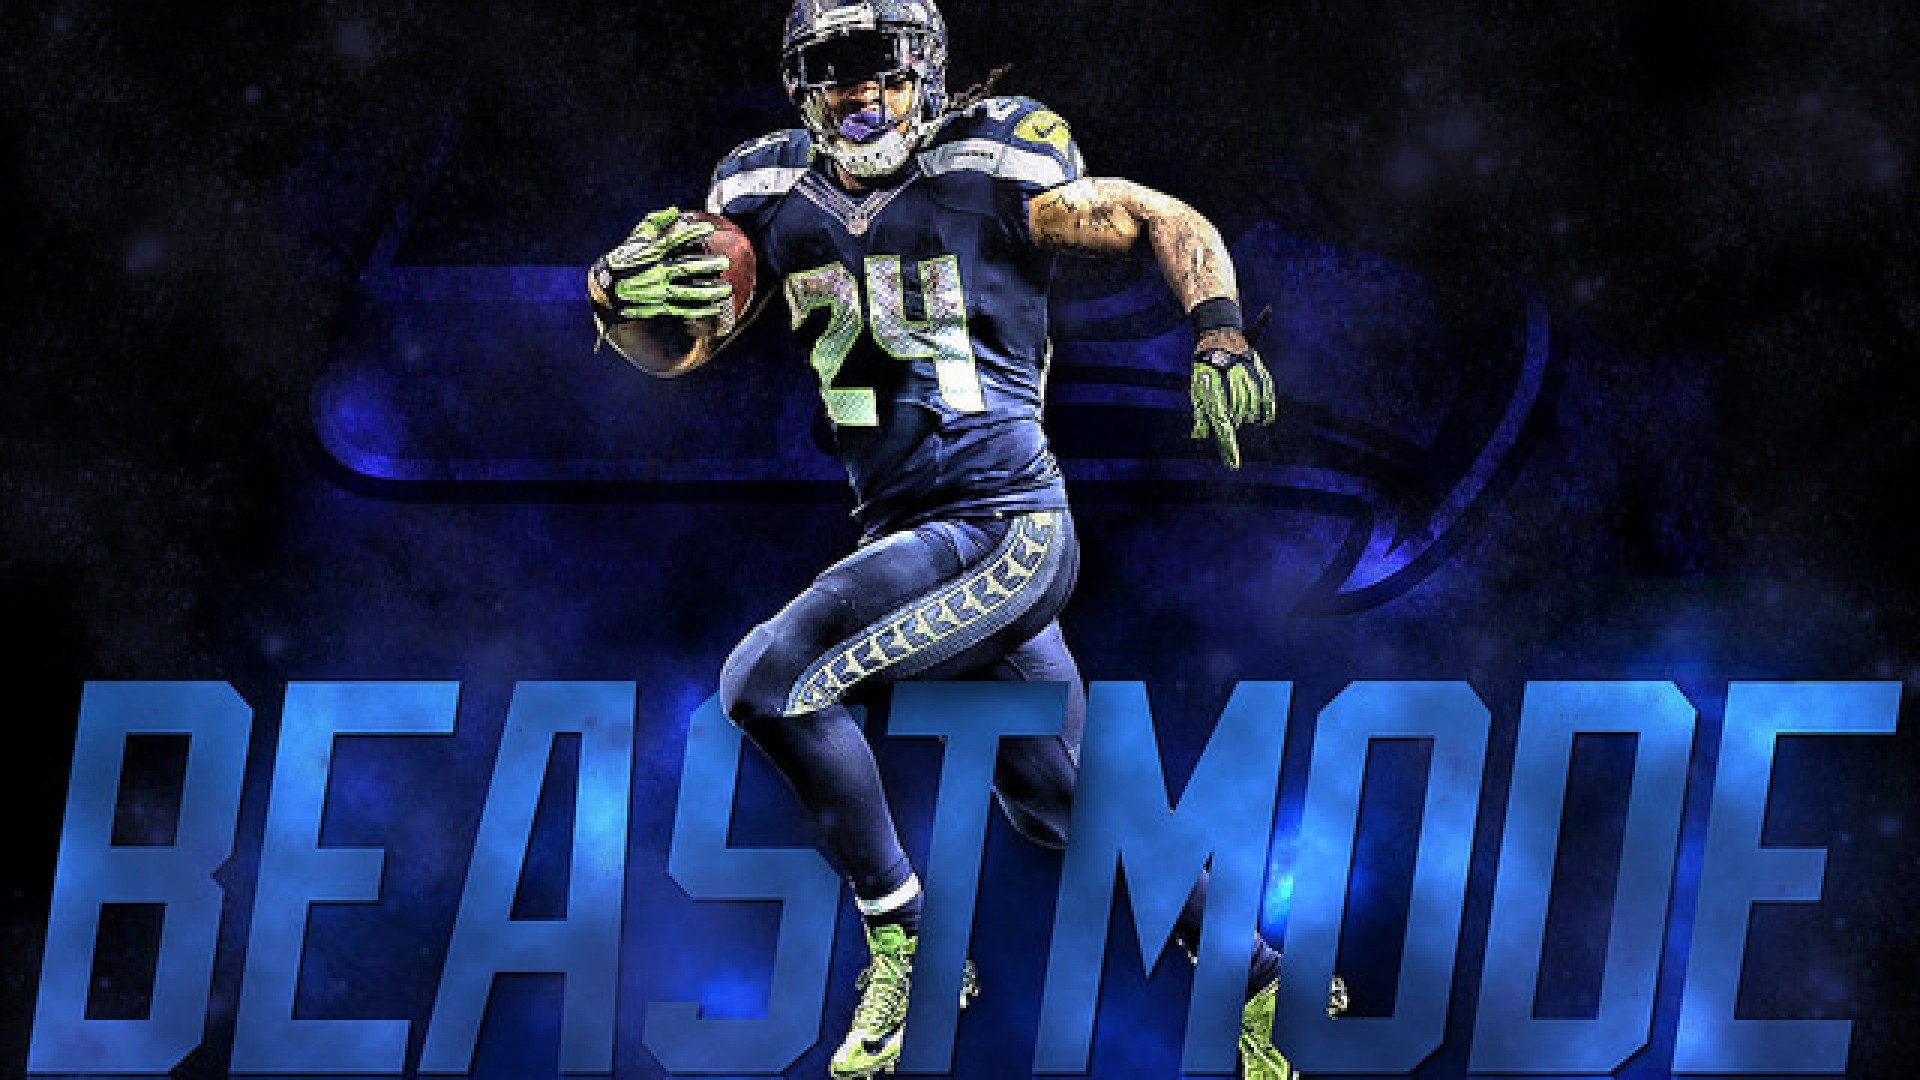 1920x1080 marshawn lynch wallpaper seahawks - photo #3. choices | The Intersect